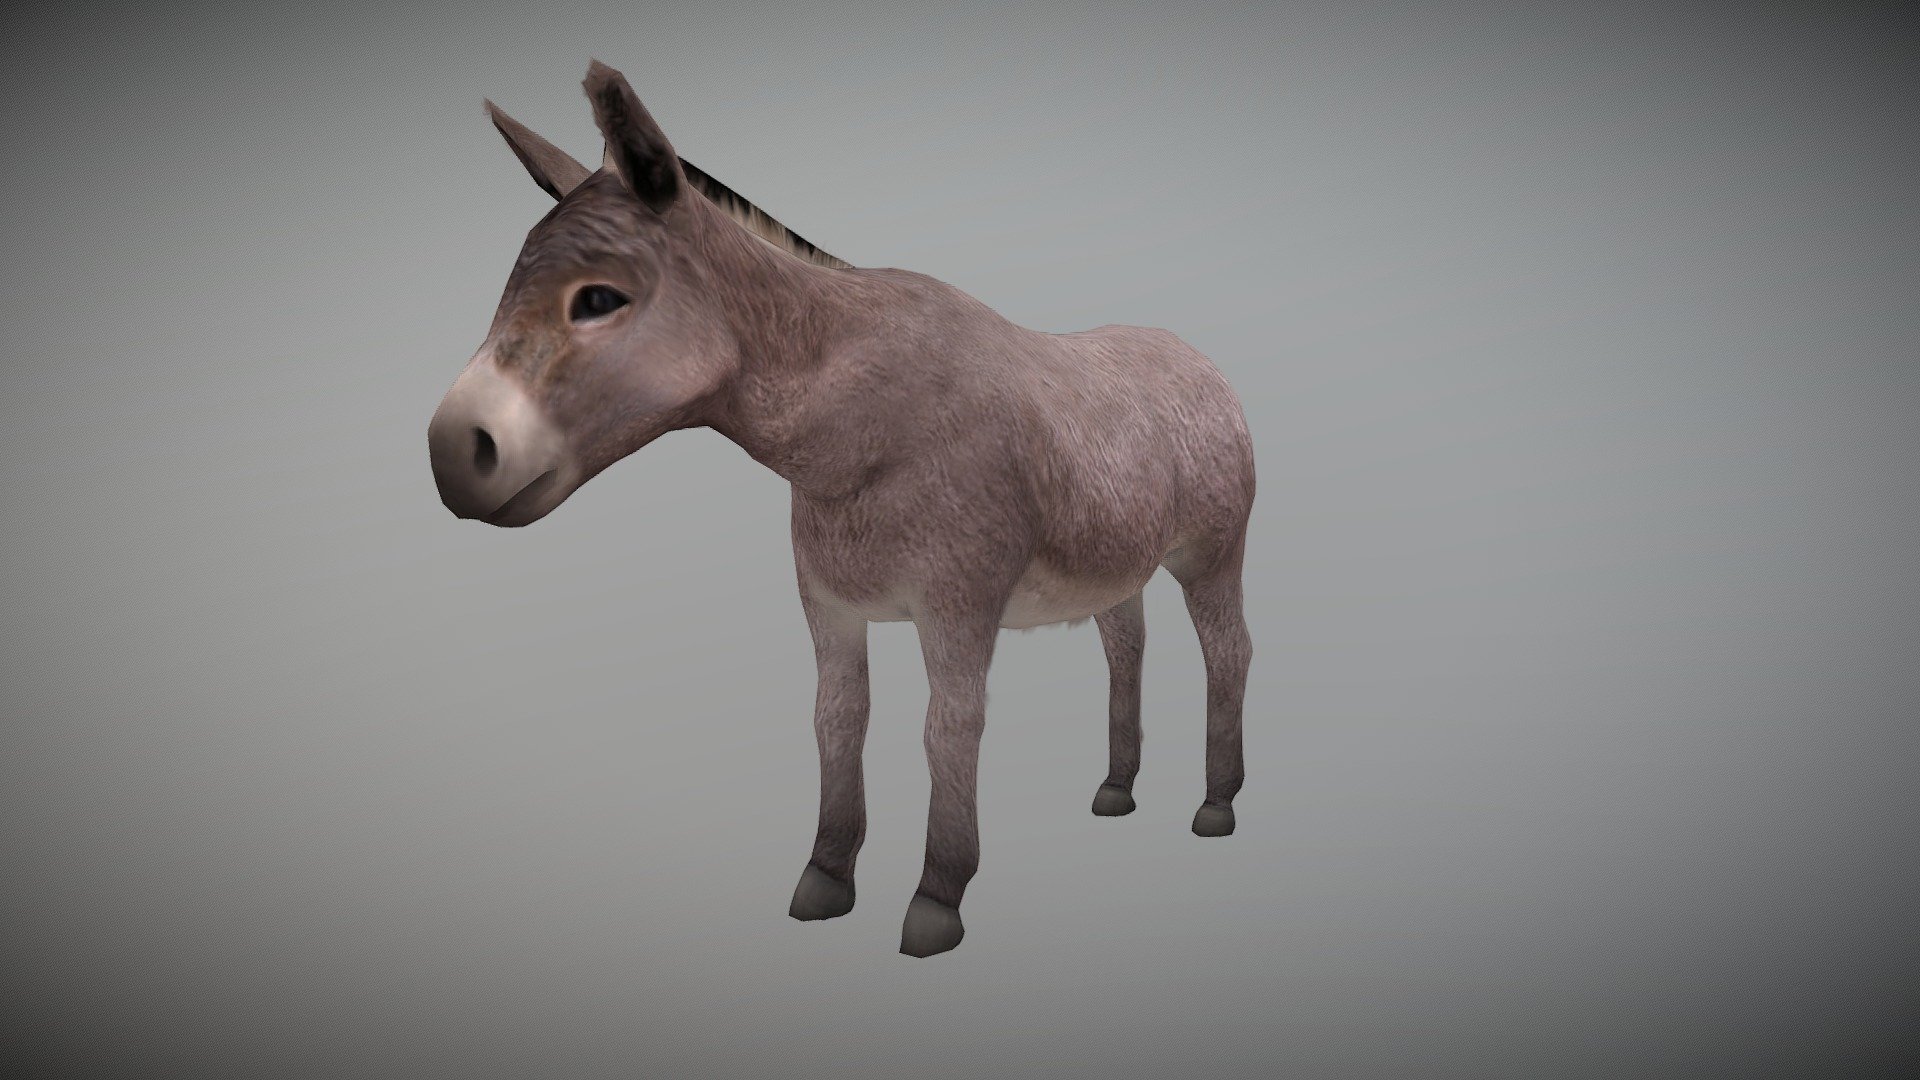 WATCH = https://youtu.be/0tD8L2FPuzU

Donkey 3d Model

PACKAGE INCLUDE


High quality polygonal model, correctly scaled for an accurate representation of the original object.
Model is built to real-world scale.
Many different format like blender, fbx, obj, iclone, dae
No additional plugin is needed to open the model.
3d print ready
Ready for animation
Loopable seperate Animations
High Quality materials and textures
Triangles = 3144
Vertices = 1680
Edges = 4813
Faces = 3144

ANIMATIONS


Idle
Walk
Eat

3D PRINT POSES ( STL  OBJ )


STAND
LOOK SIDE 1
LOOK SIDE 2
WALK 1
WALK 2
EAT
 - DONKEY ANIMATED - Buy Royalty Free 3D model by Bilal Creation Production (@bilalcreation) 3d model